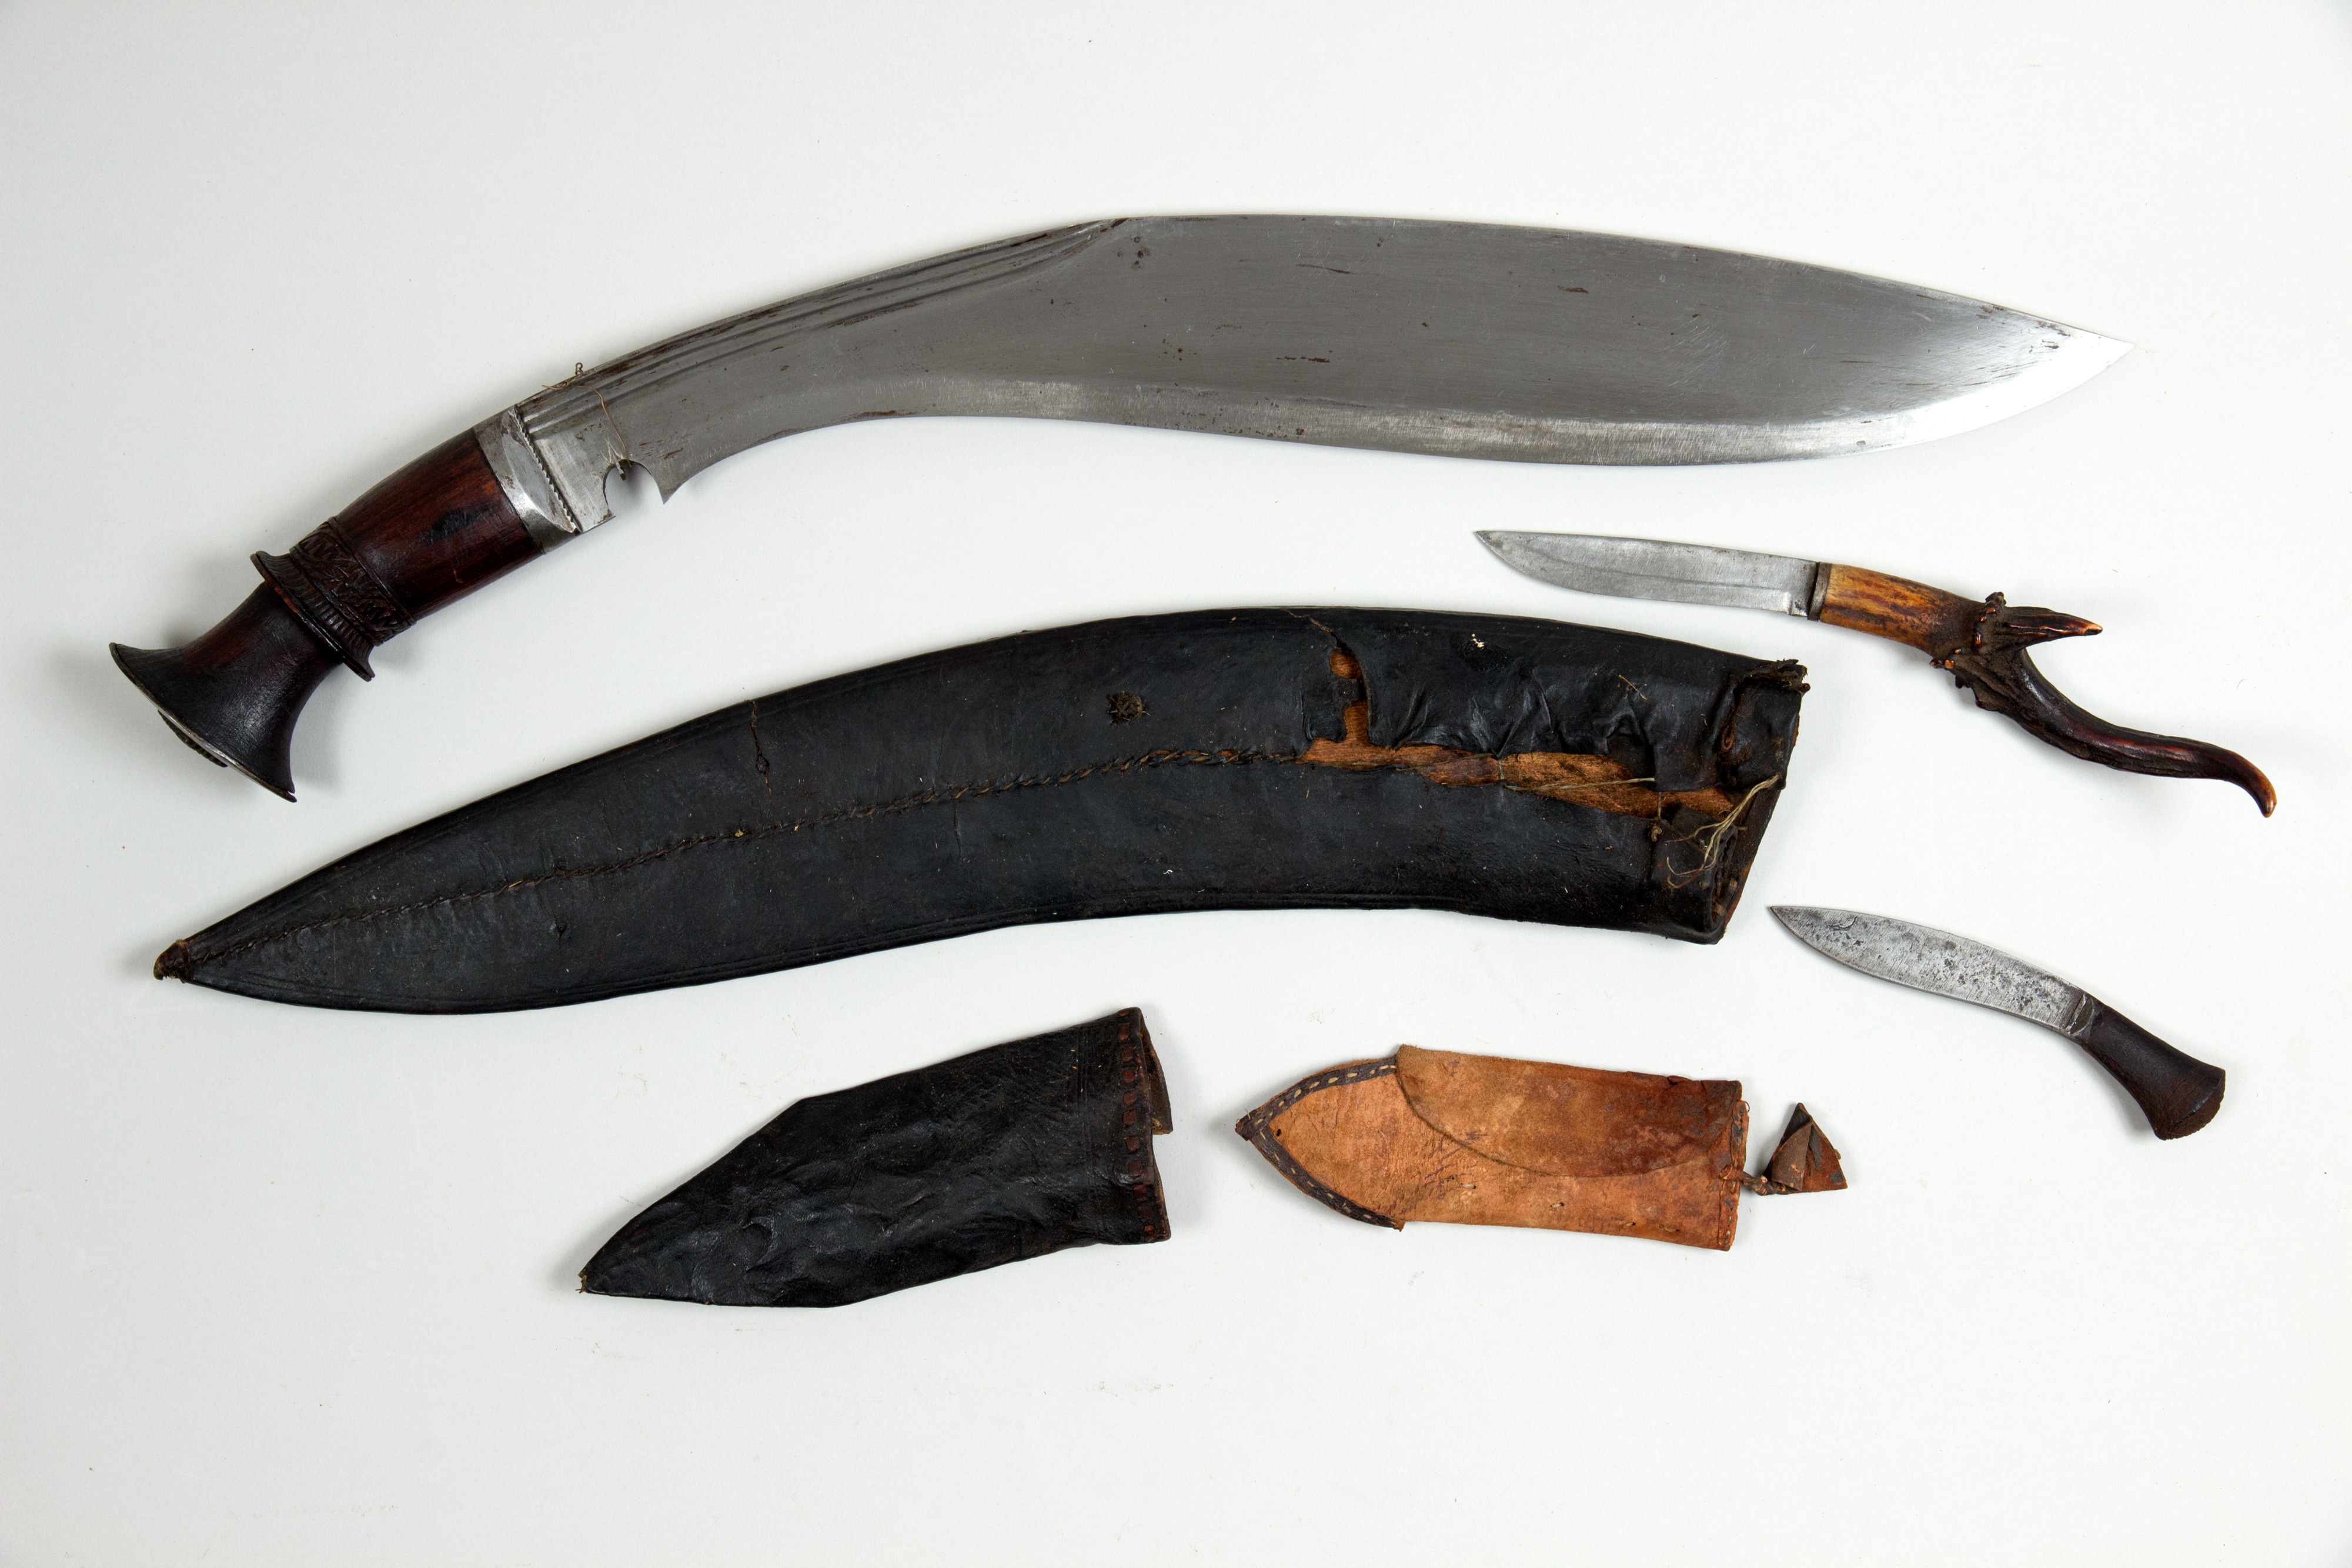 Knife (Kukri) with Sheath and Pouch with Two Small Knives, Indian or  Nepalese, Gurkha